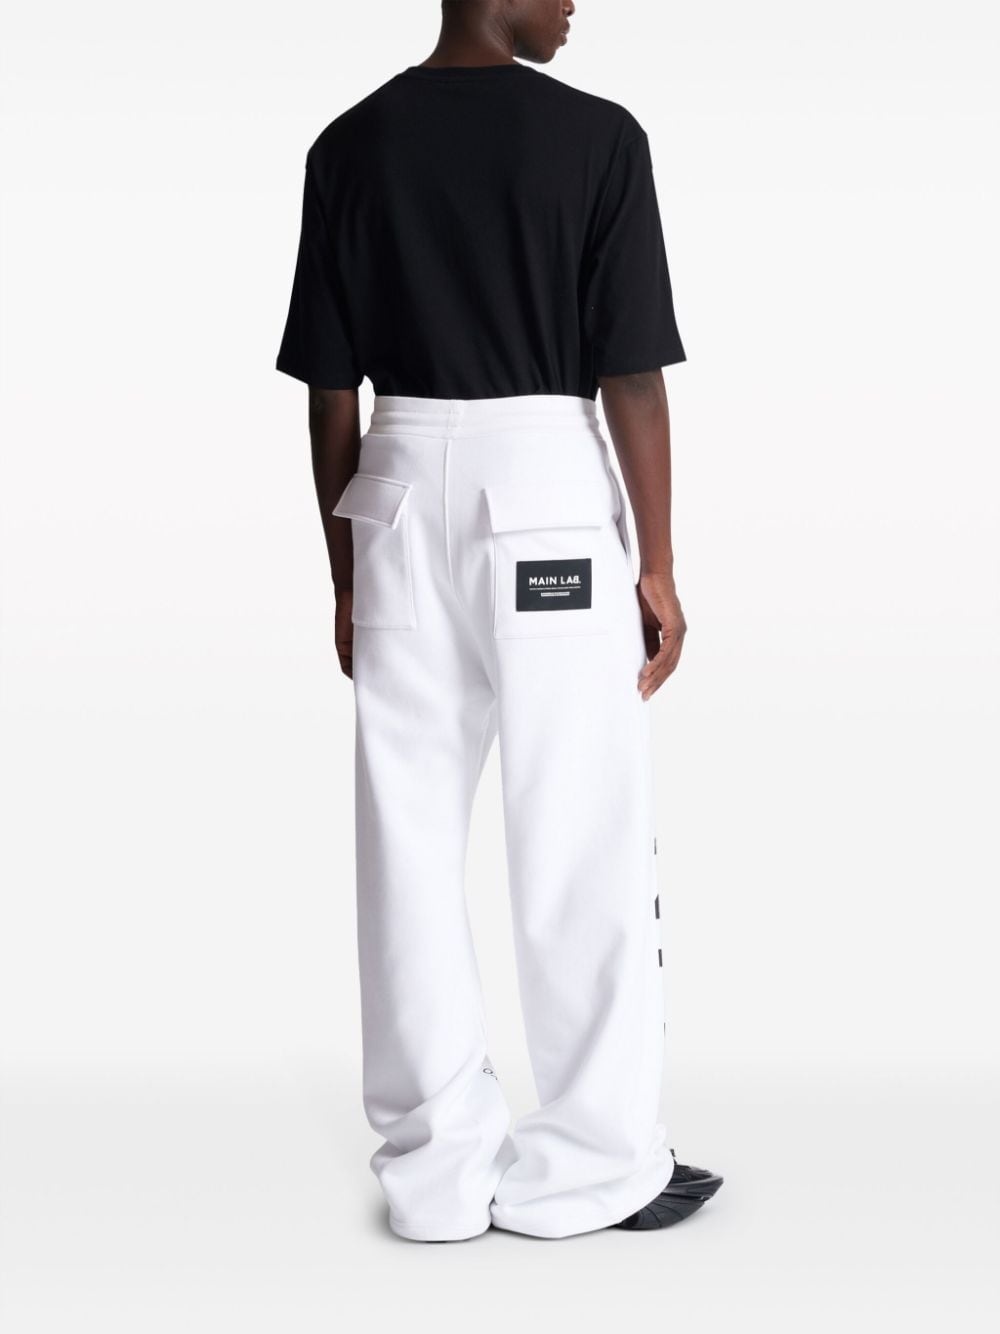 Main Lab track trousers - 4